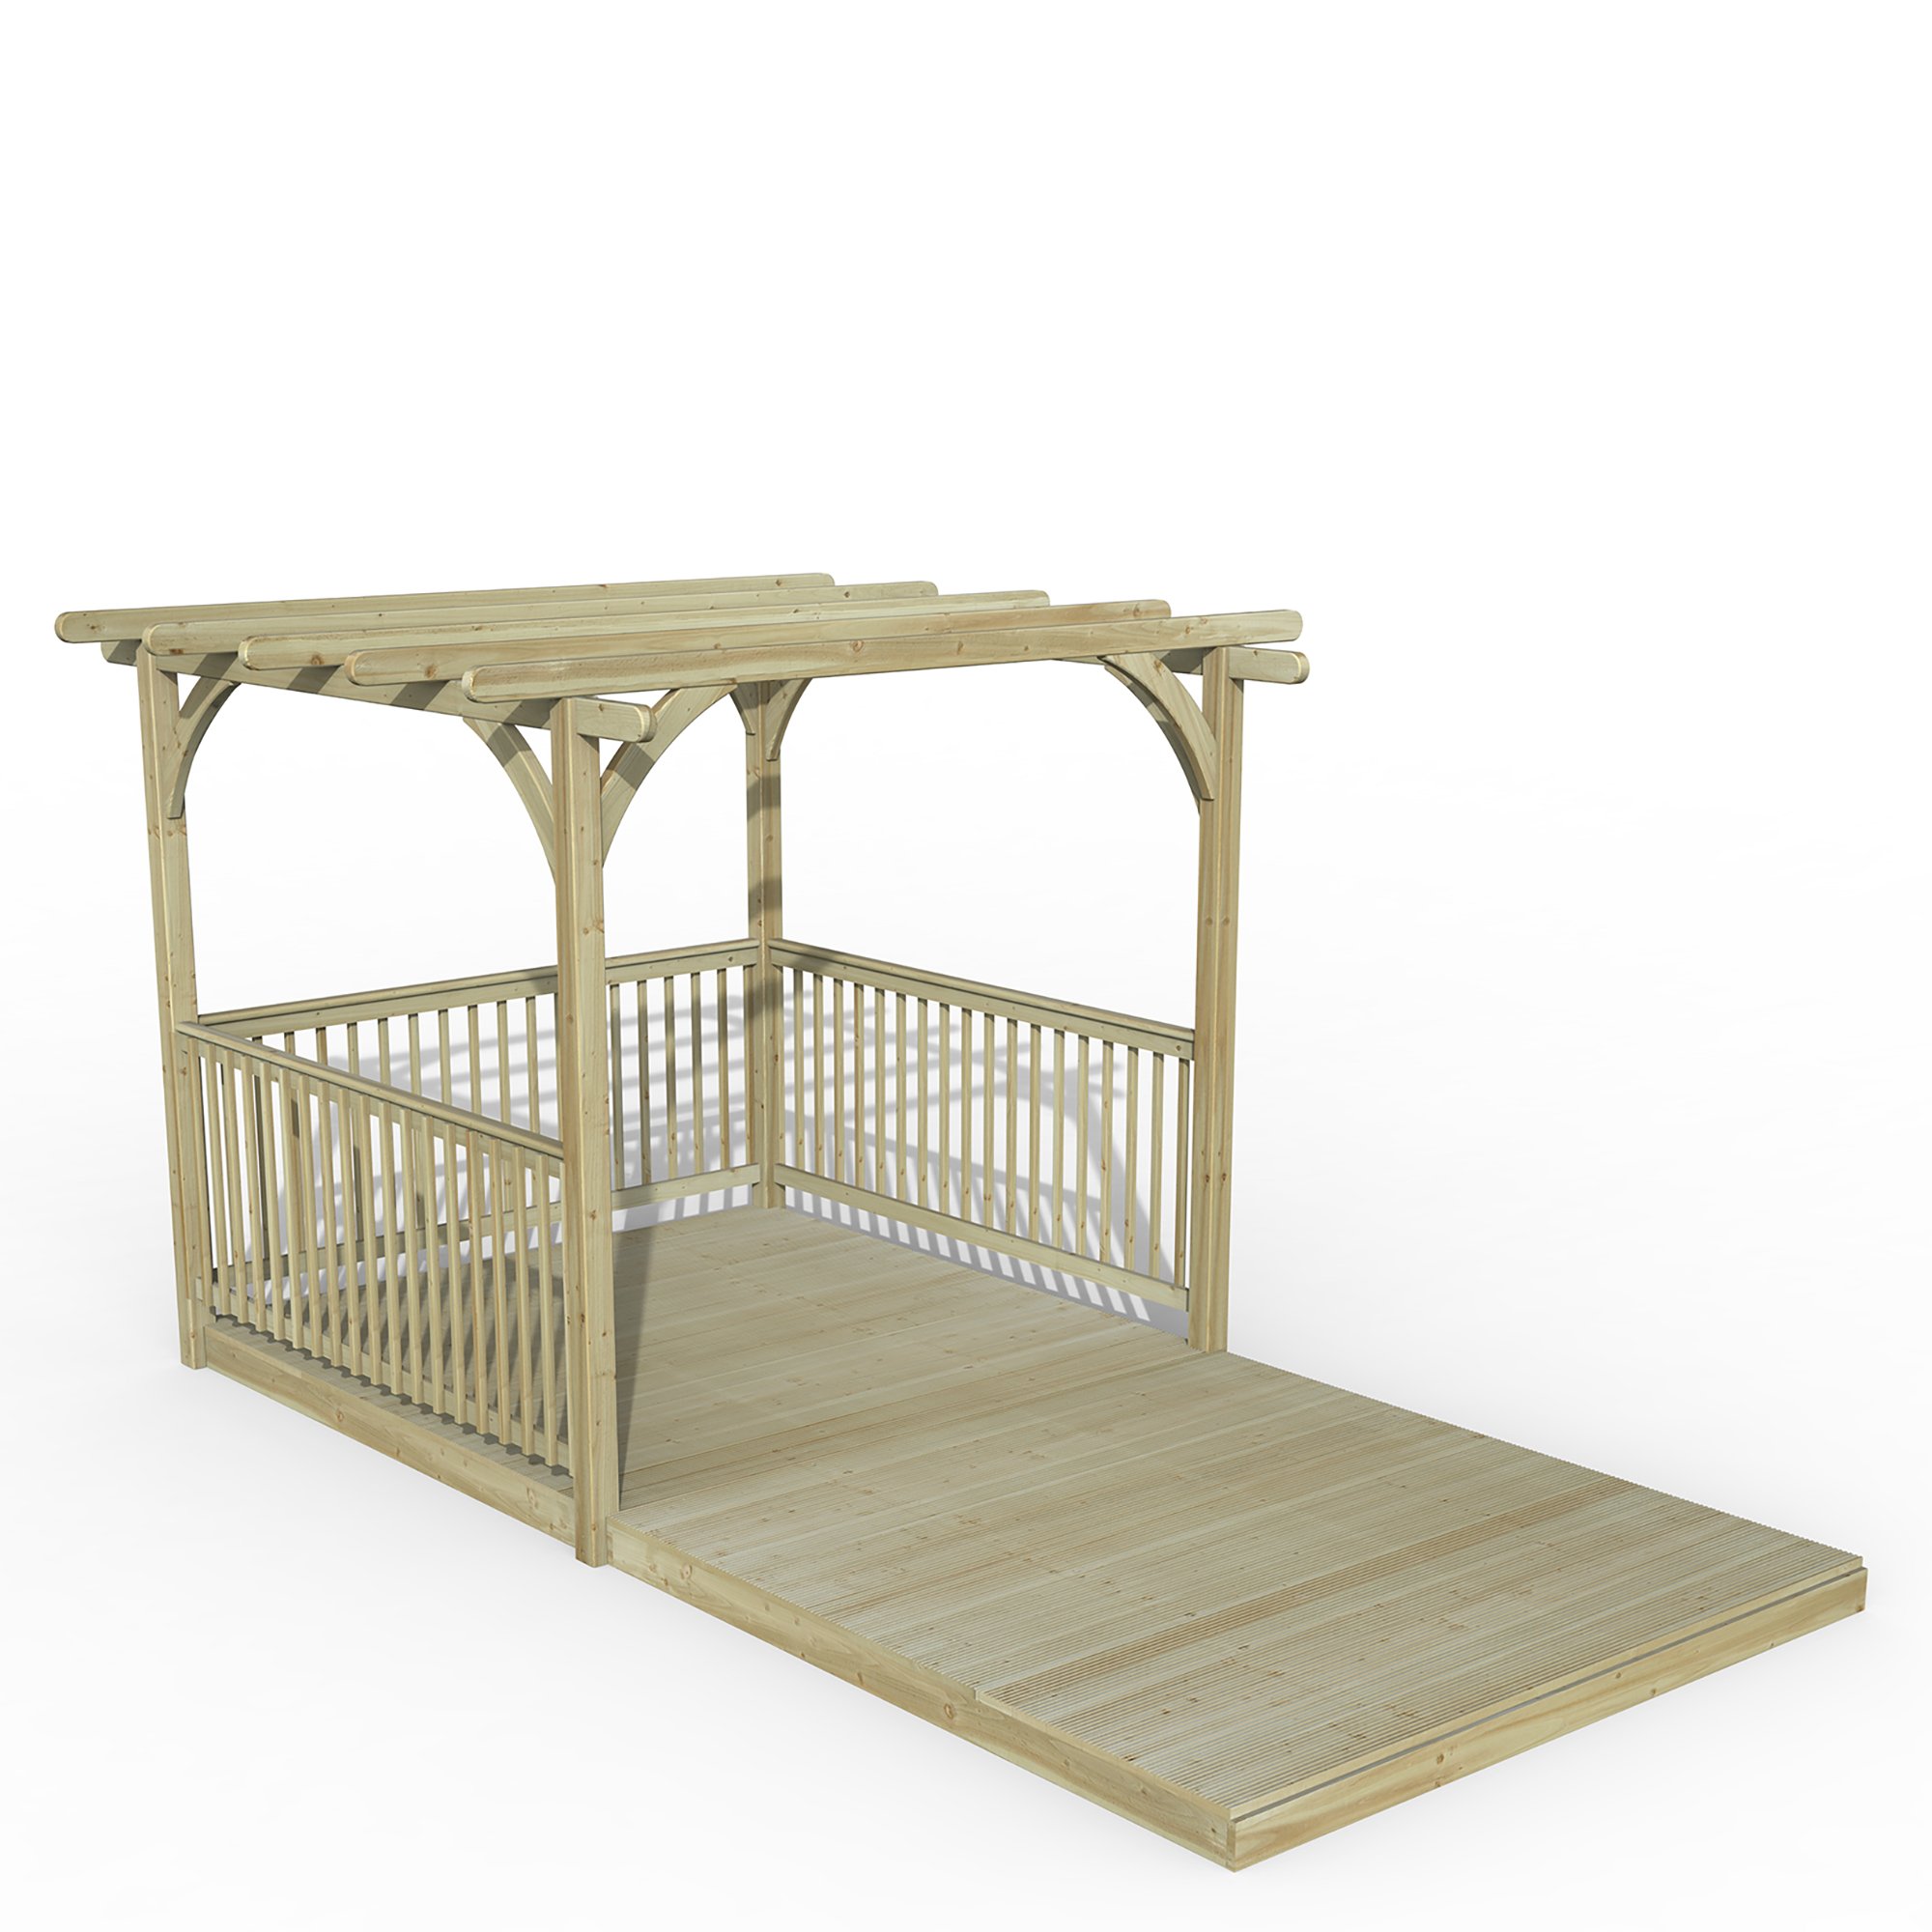 Forest Garden 2.4 x 4.8m Ultima Pergola and Decking Kit with 3 x Balustrade